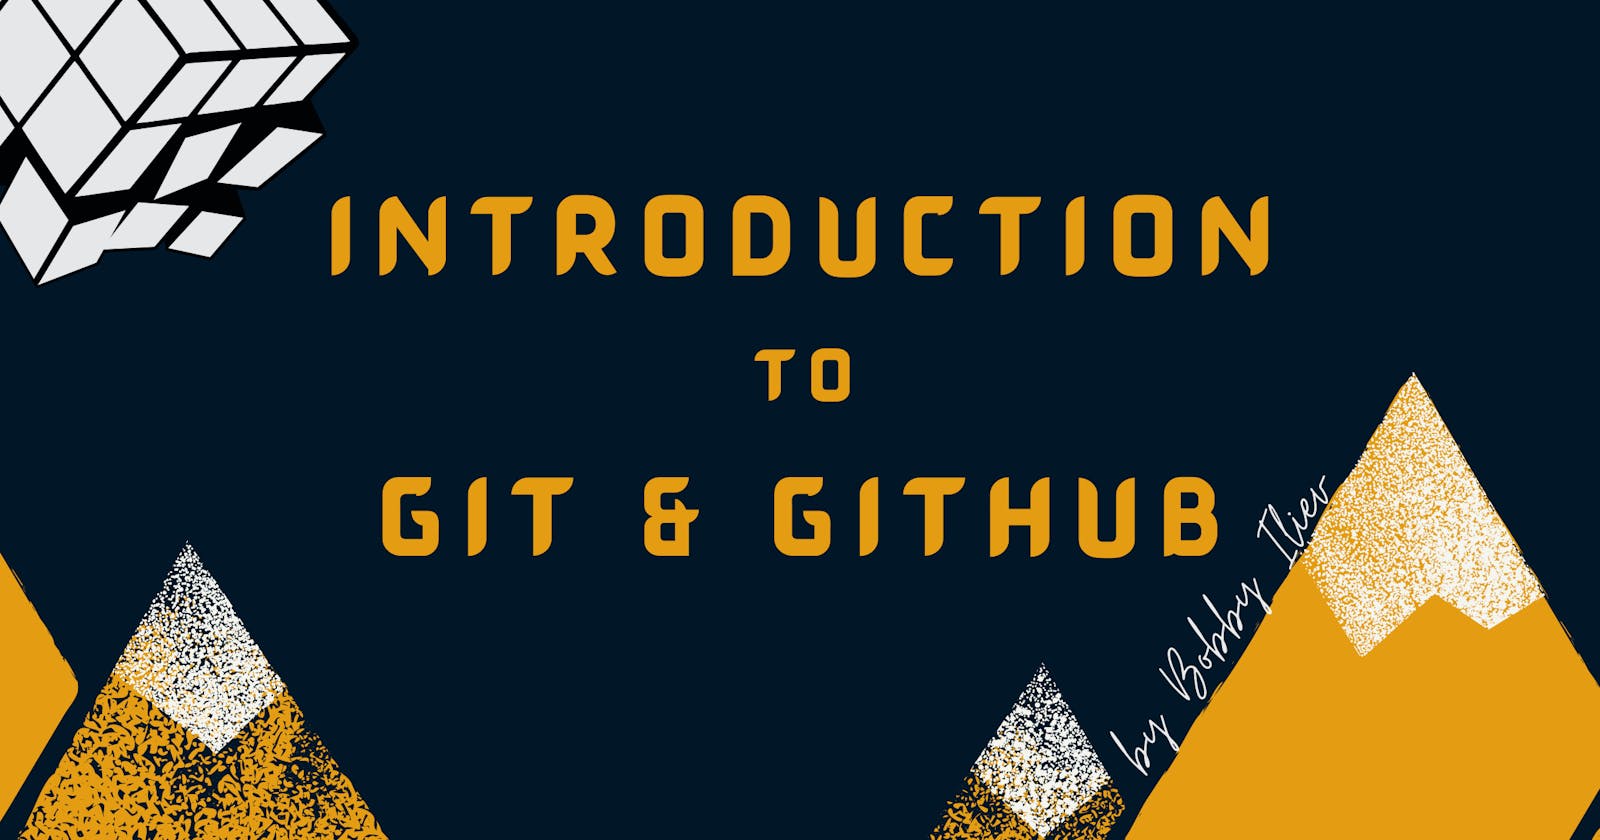 Open-source Introduction to Git and GitHub eBook 💡